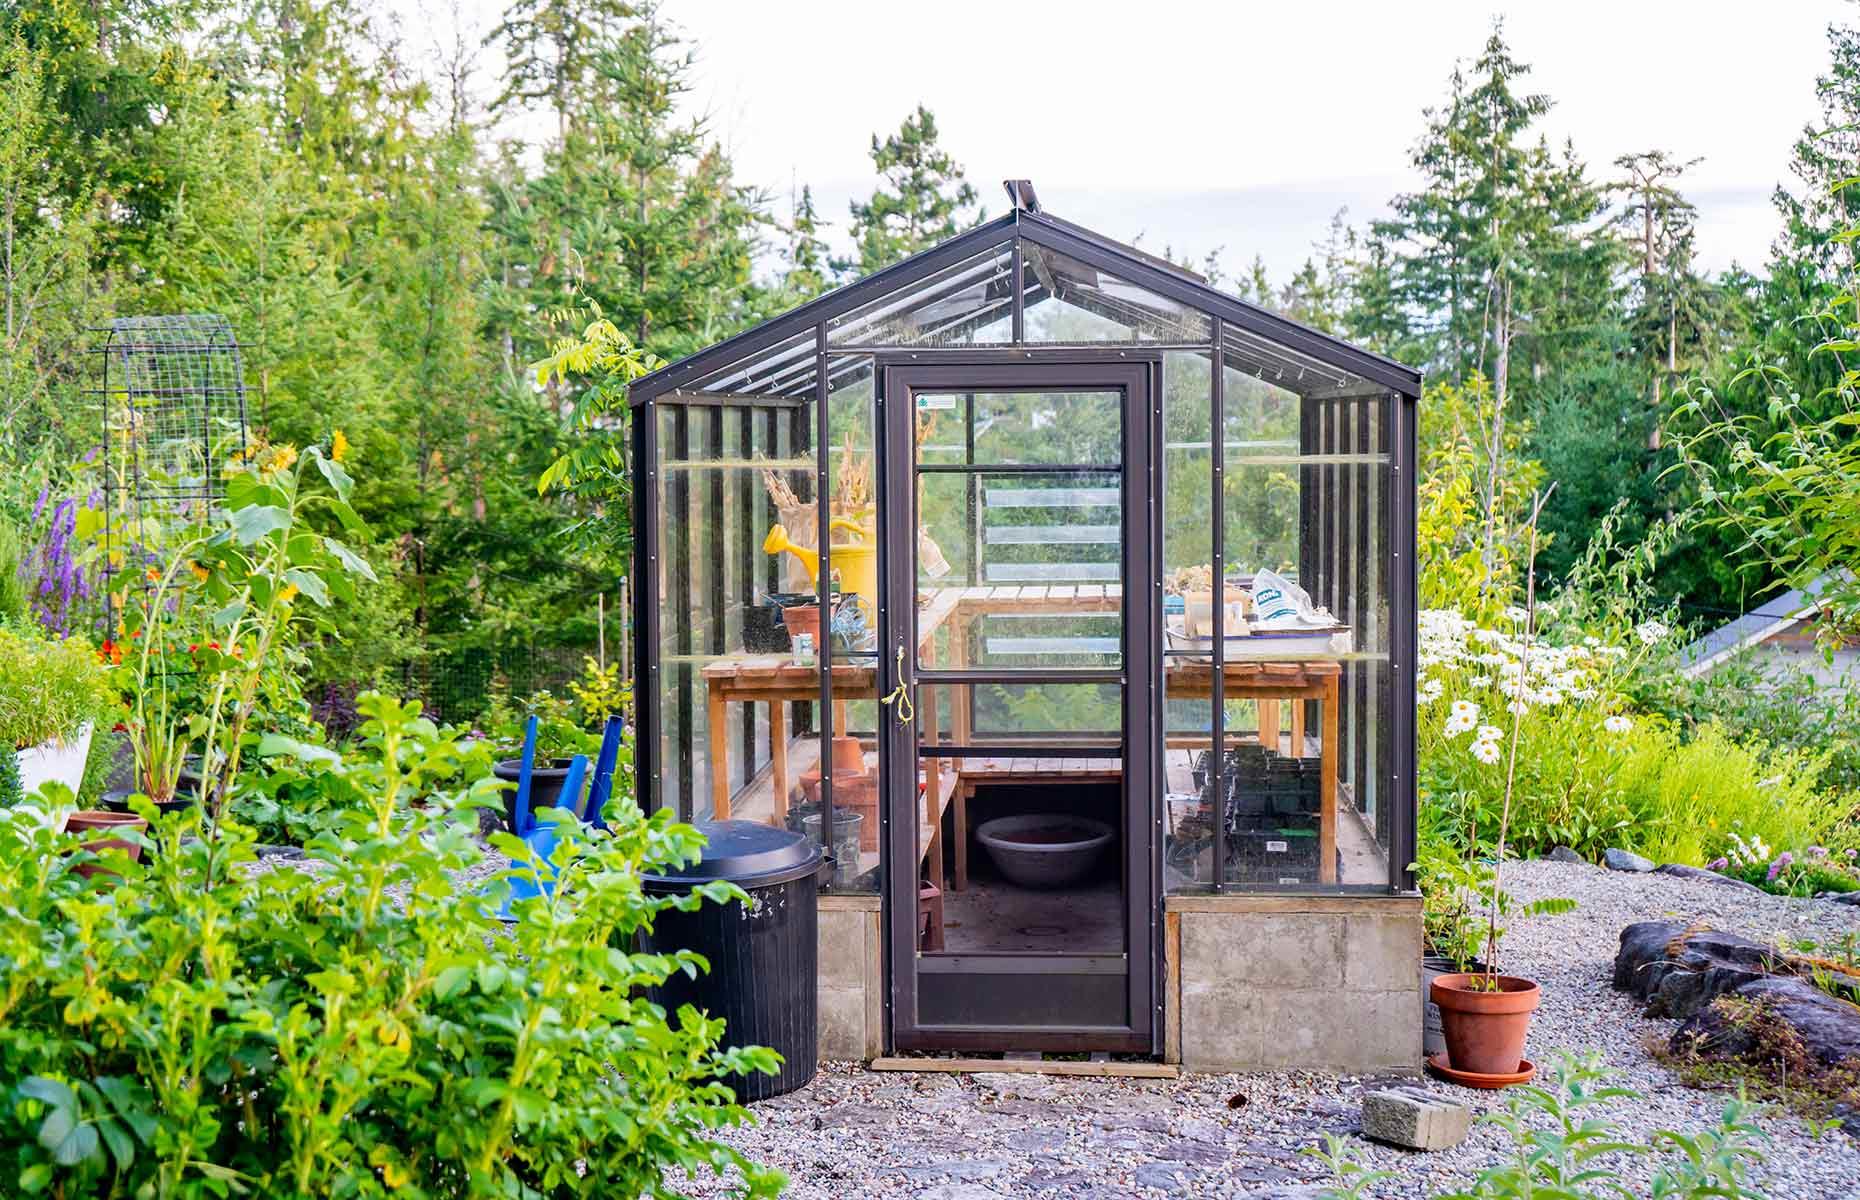 <p>You don’t <em>need</em> a <a href="https://www.loveproperty.com/news/95756/greenhouses-and-cold-frames-you-can-get-delivered">greenhouse</a> to grow your own fruit and vegetables, but it sure helps. Having a greenhouse allows you to grow more crops for longer. You’ll be able to start crops earlier on in the season and extend harvest time, producing a much greater yield. It also allows you to produce more crops from seed, which is much cheaper than buying established plants.</p>